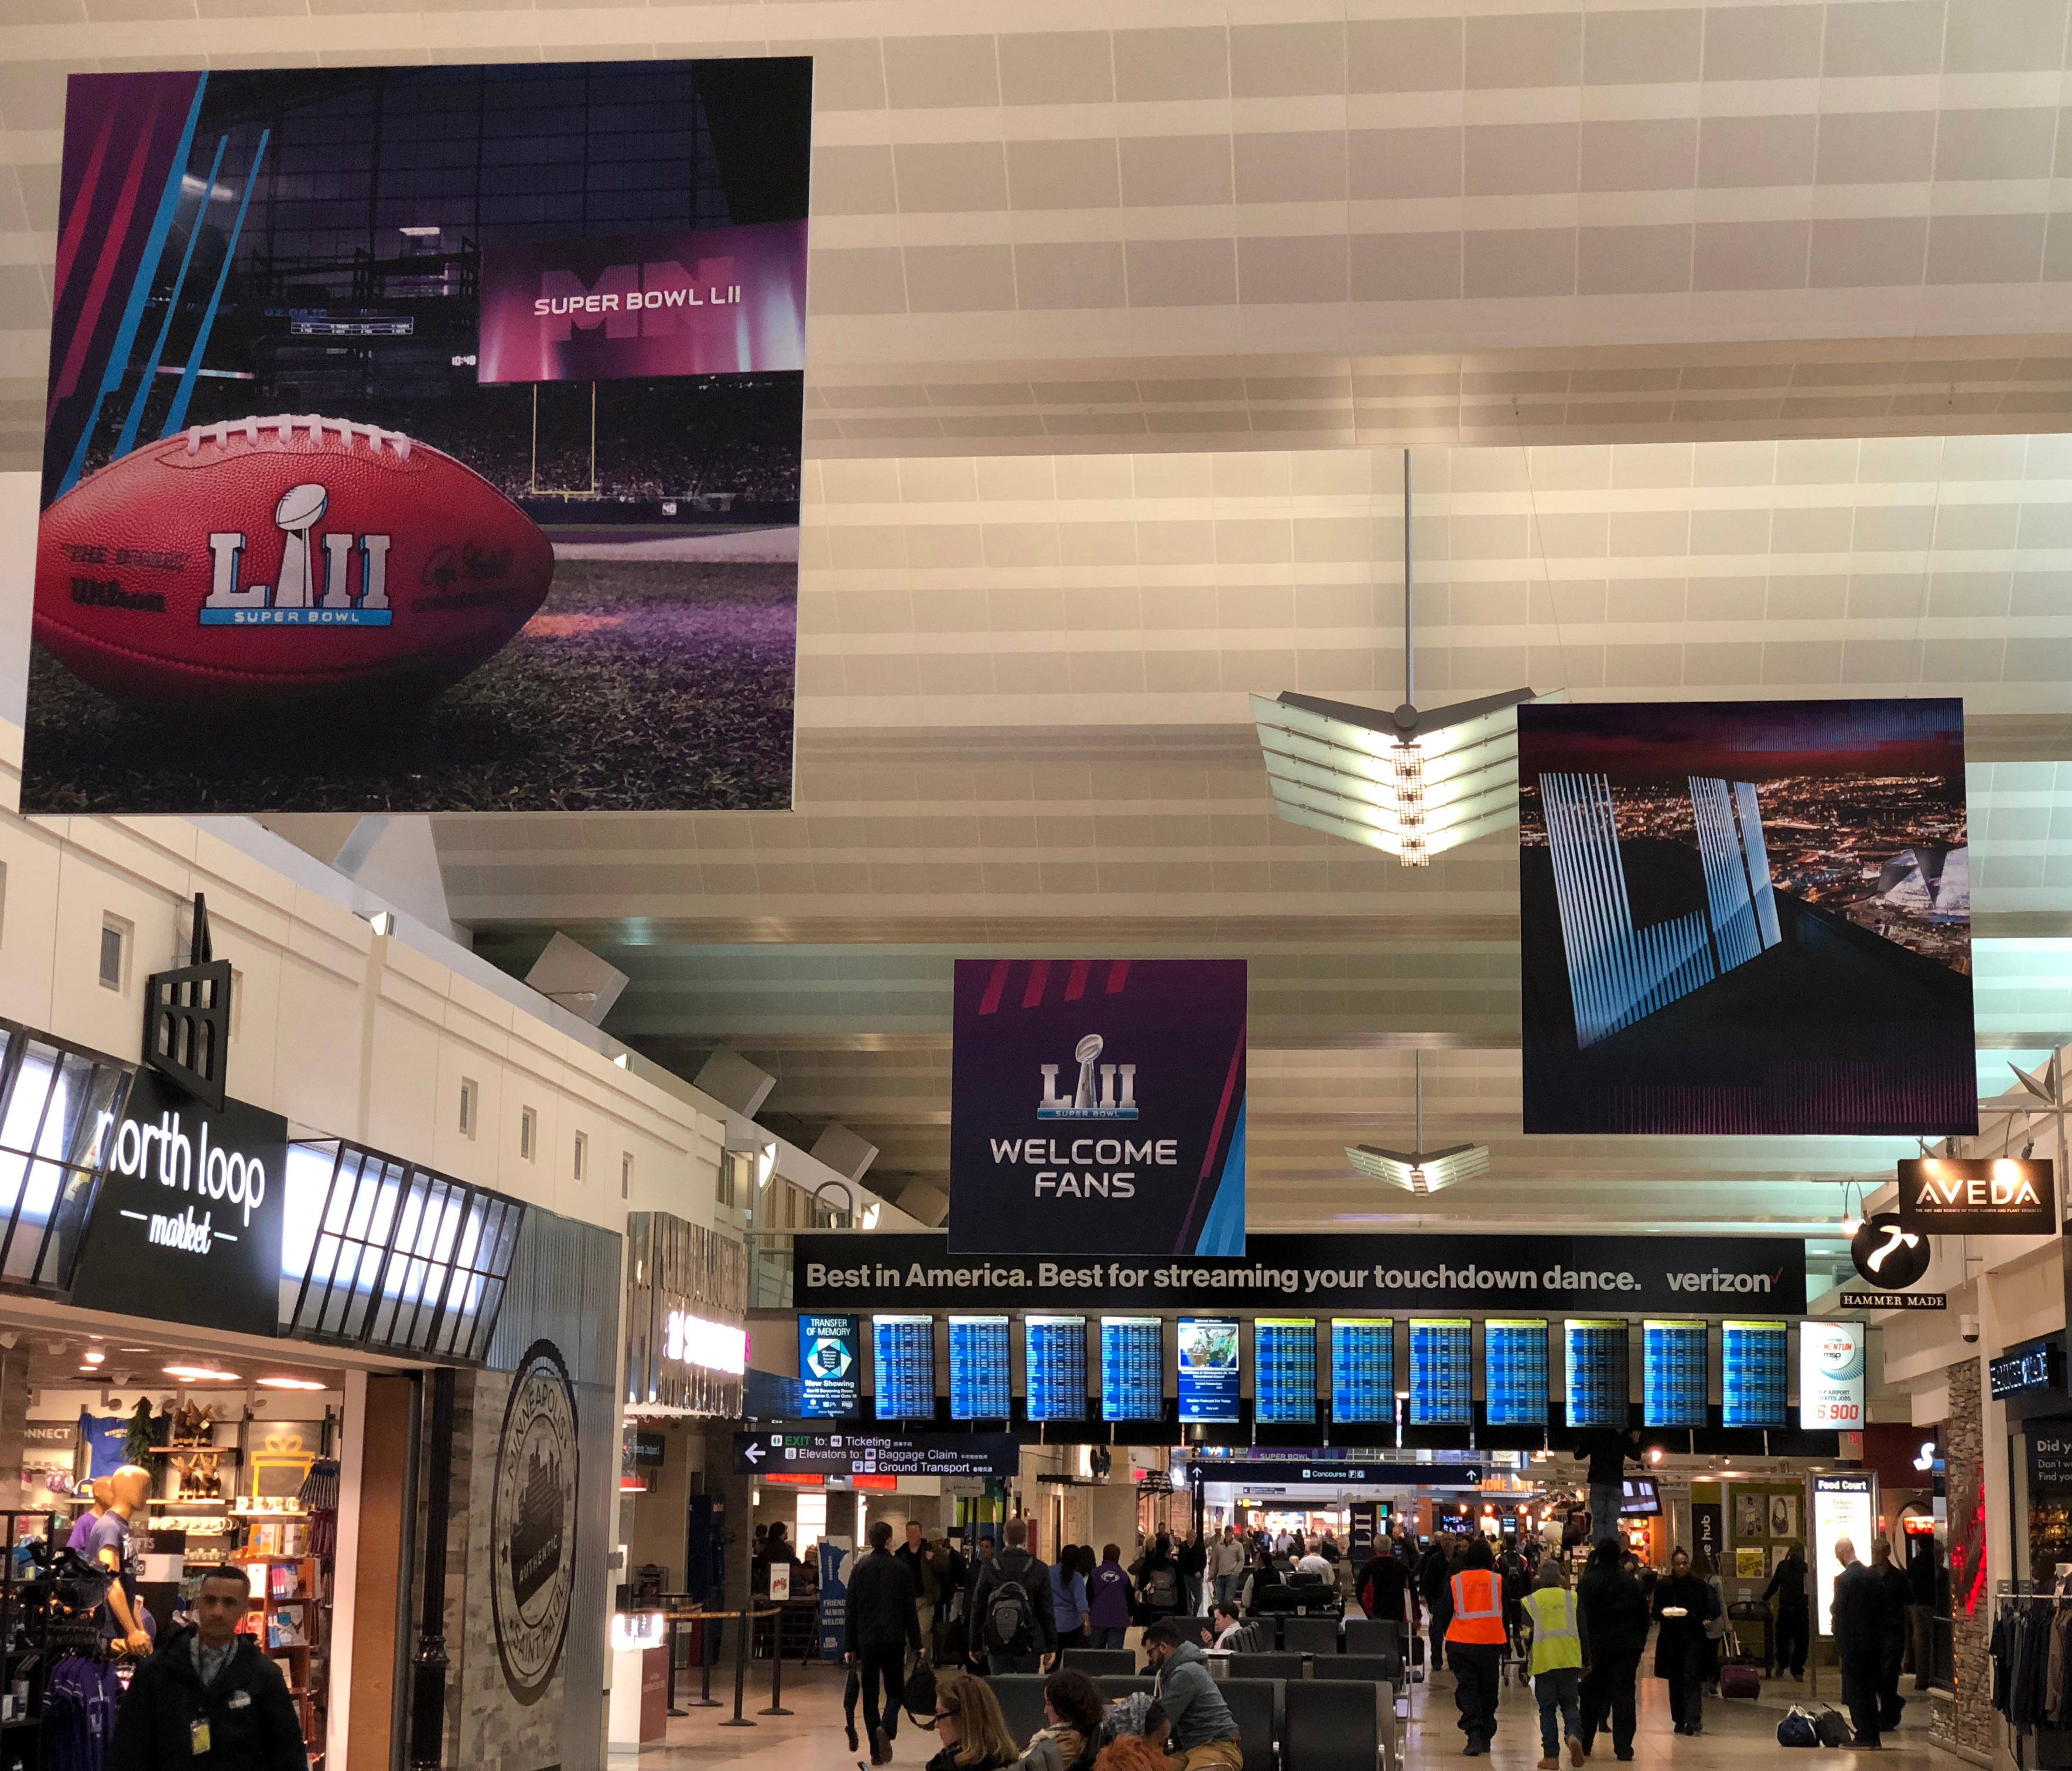 A general view of Super Bowl LII signage at Terminal 1 of the Minneapolis/St. Paul International Airport as seen Jan. 29, 2018, ahead of the Super Bowl.